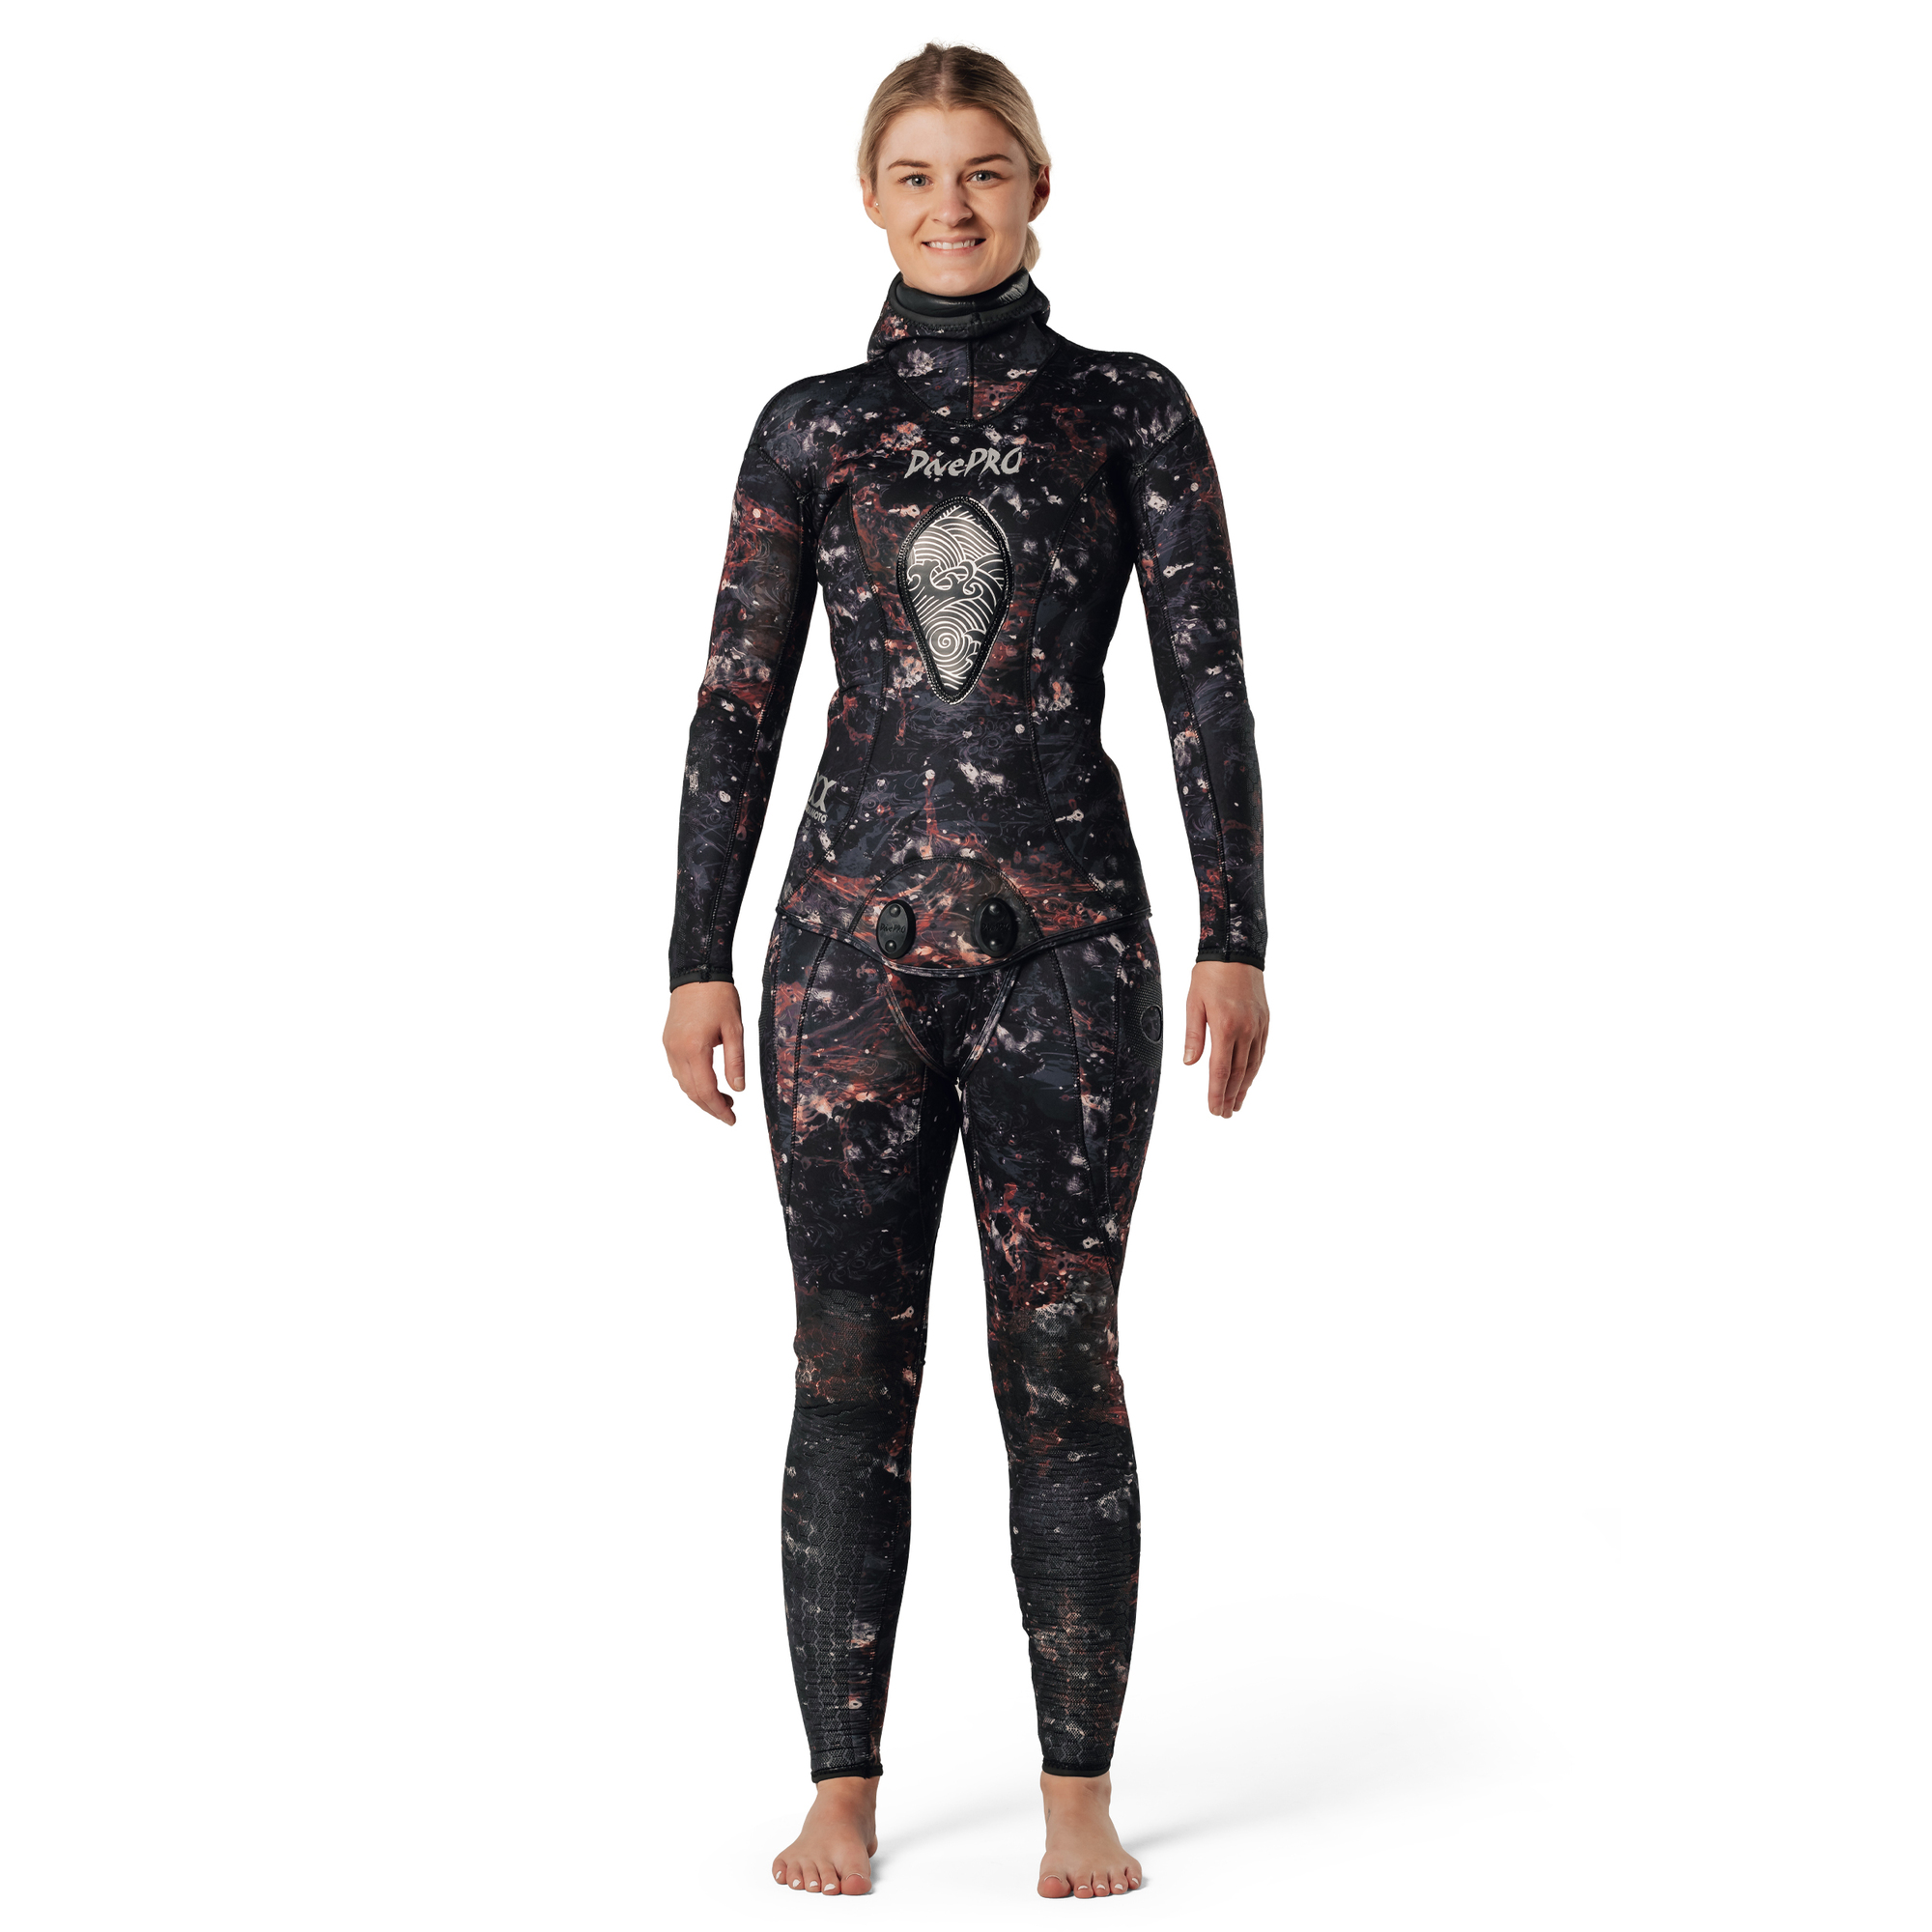 DivePRO Opencell Wetsuit Yamamoto 39 Ghost 5mm